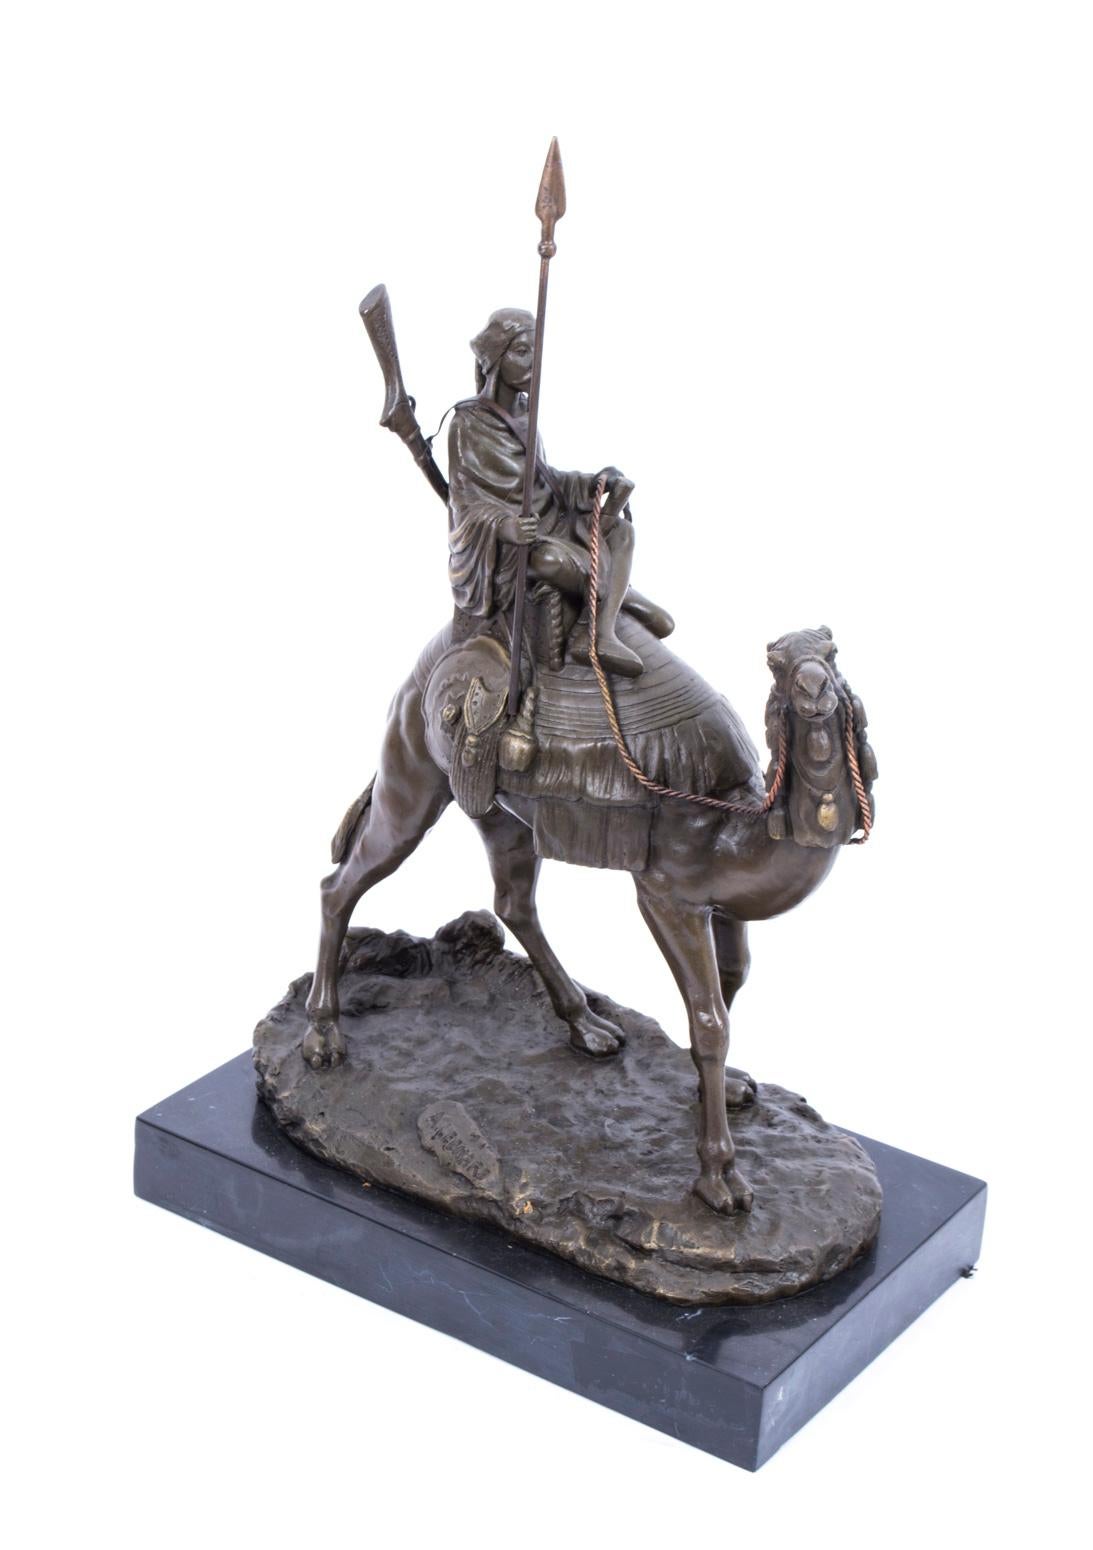 This is a bronze sculpture of a Bedouin warrior with spear and rifle riding his ship of the desert, from the late 20th century.
This high quality hot cast solid bronze was produced using the traditional 